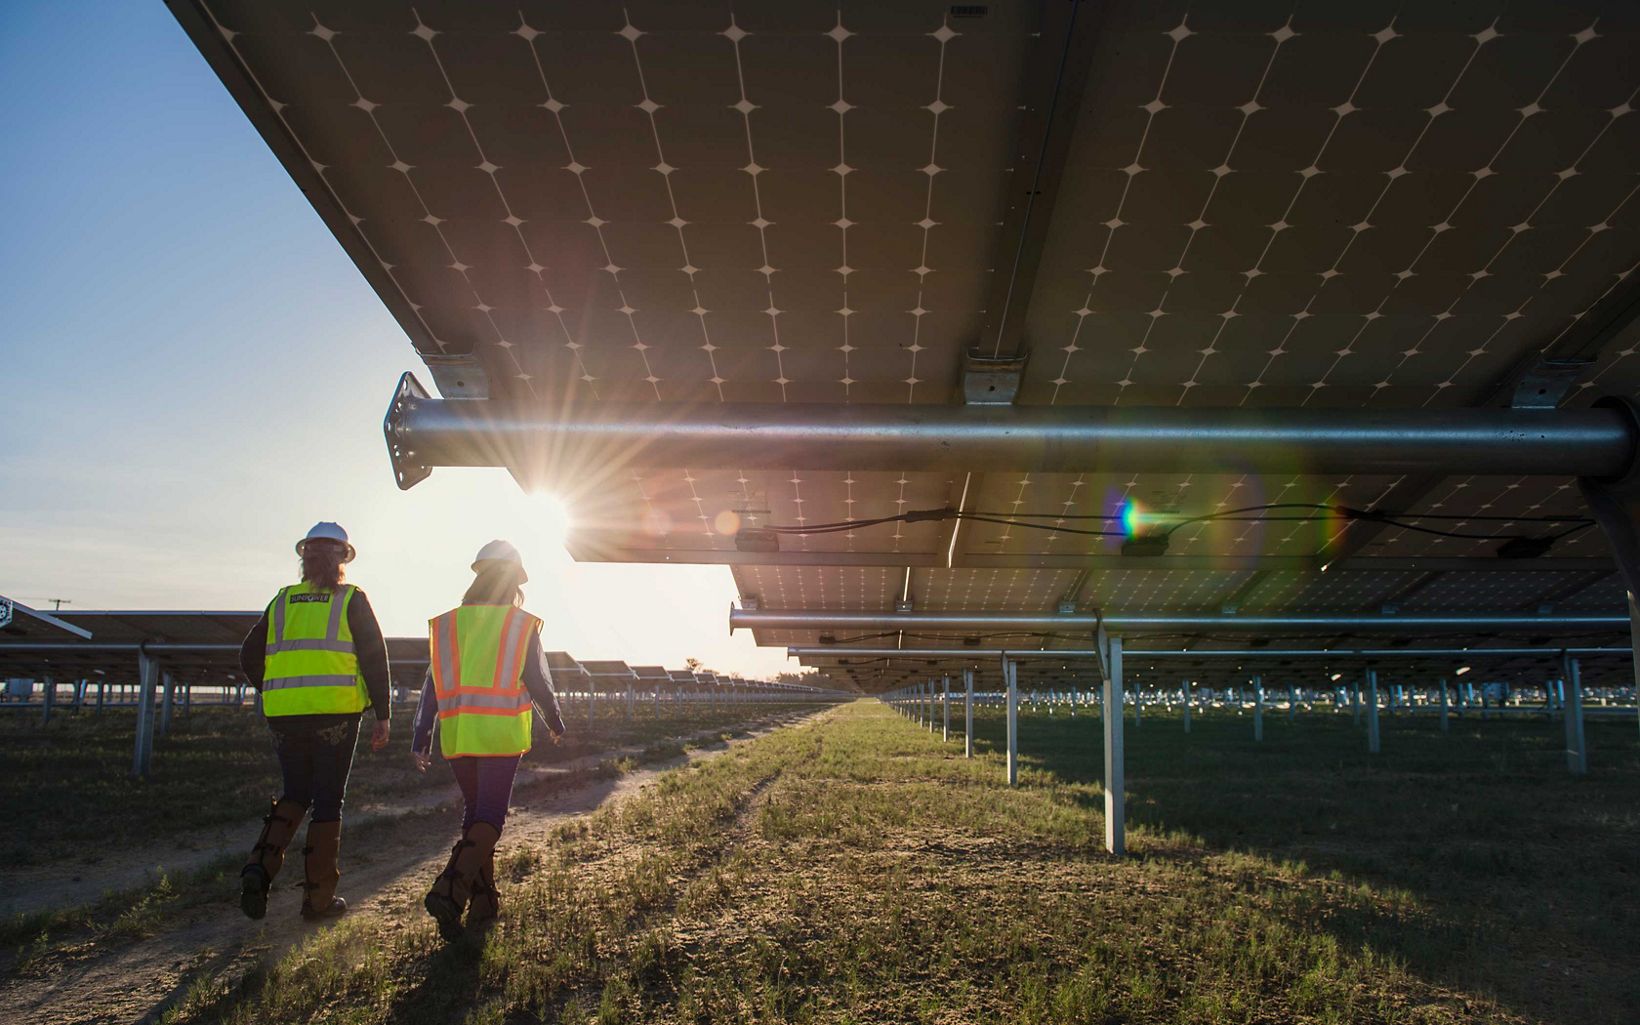 Laura Crane and a Solar Star employee walking through the array of solar panels at the Solar Star plant in Lancaster, California.